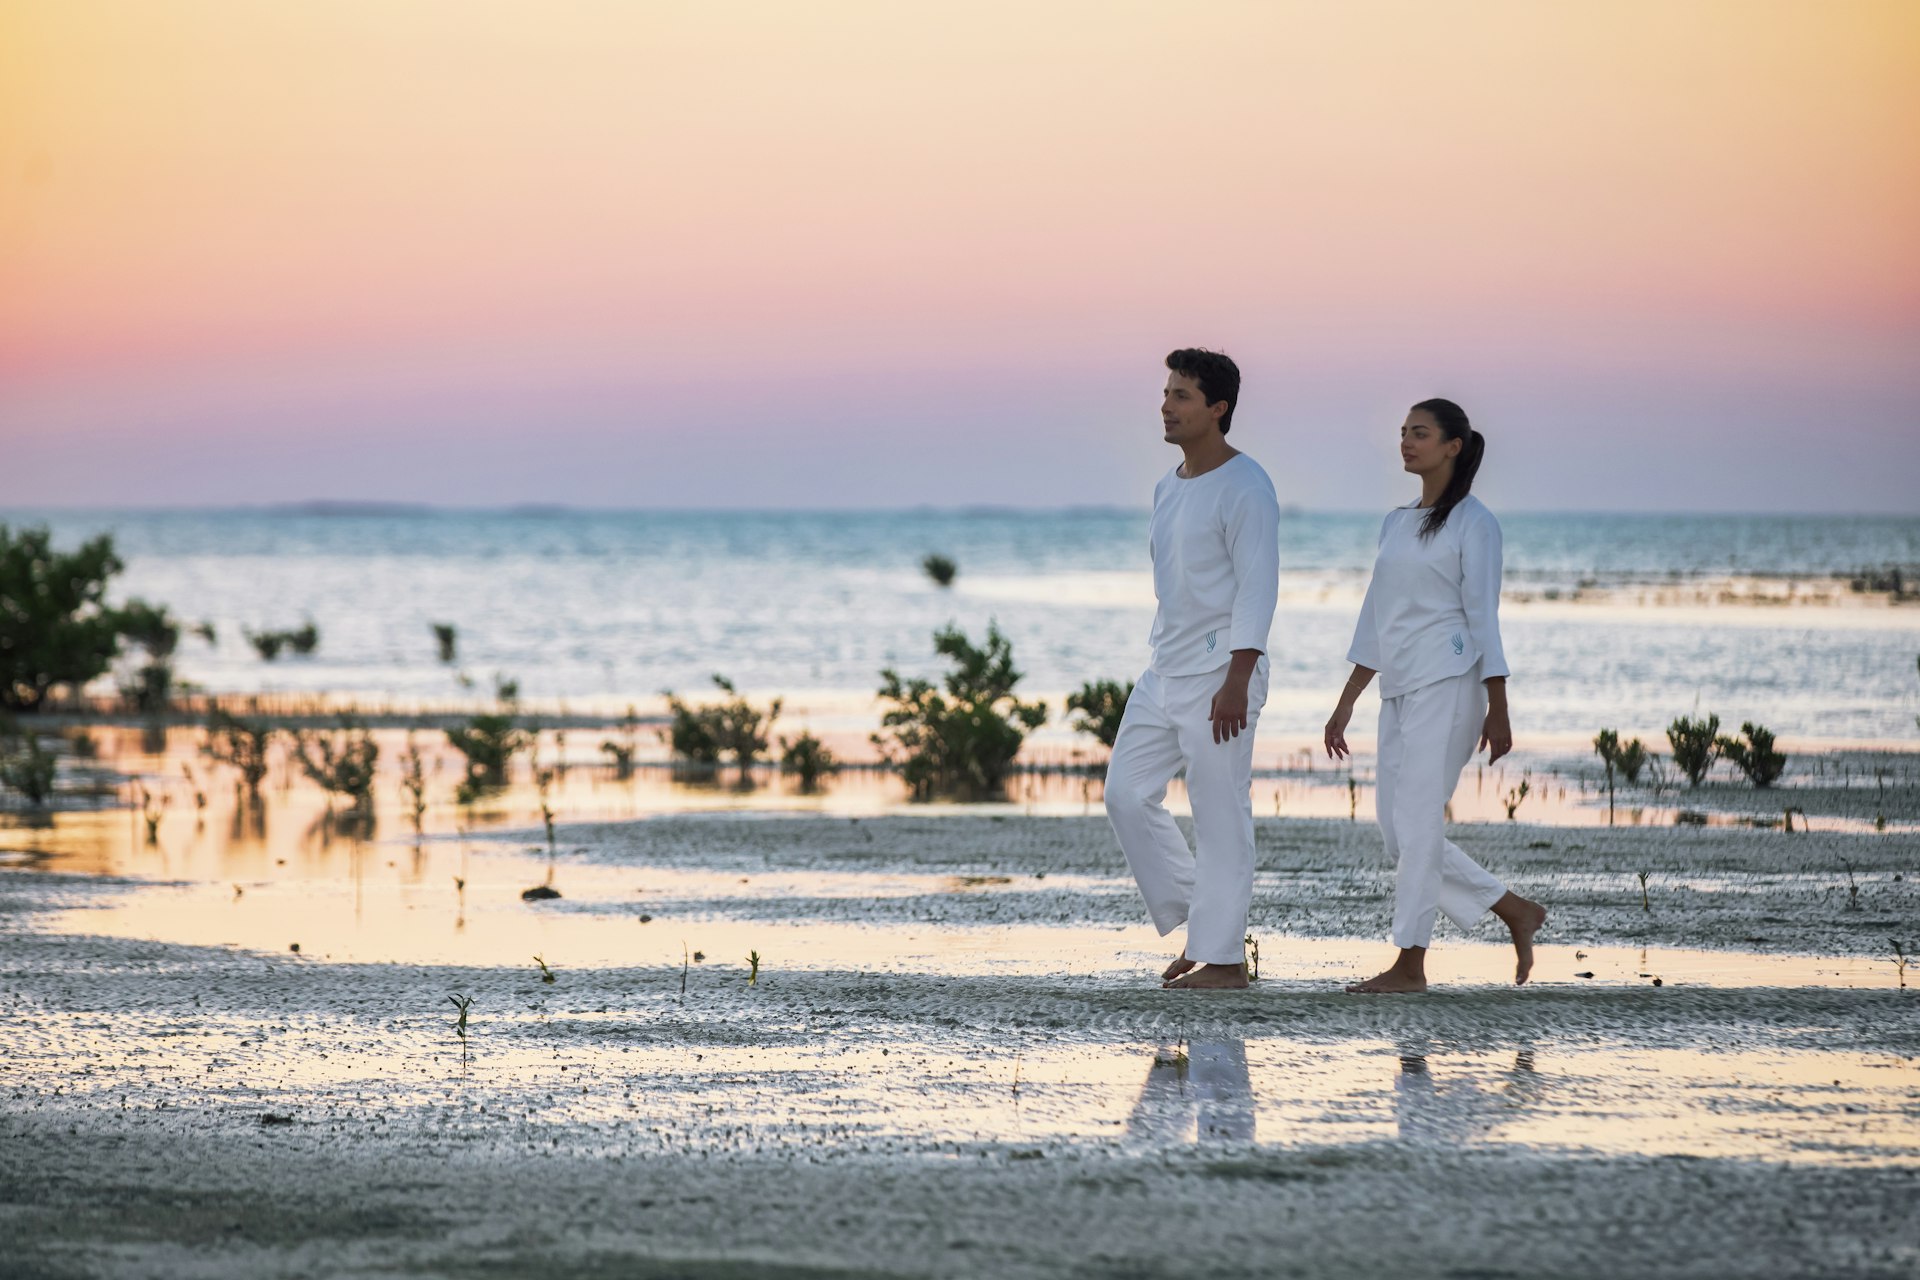 A couple, a man and a woman in white shirt and trousers, walk along a beach in Qatar as the sun sets in orange and purple behind them as part of the Zulal Wellness Resort.